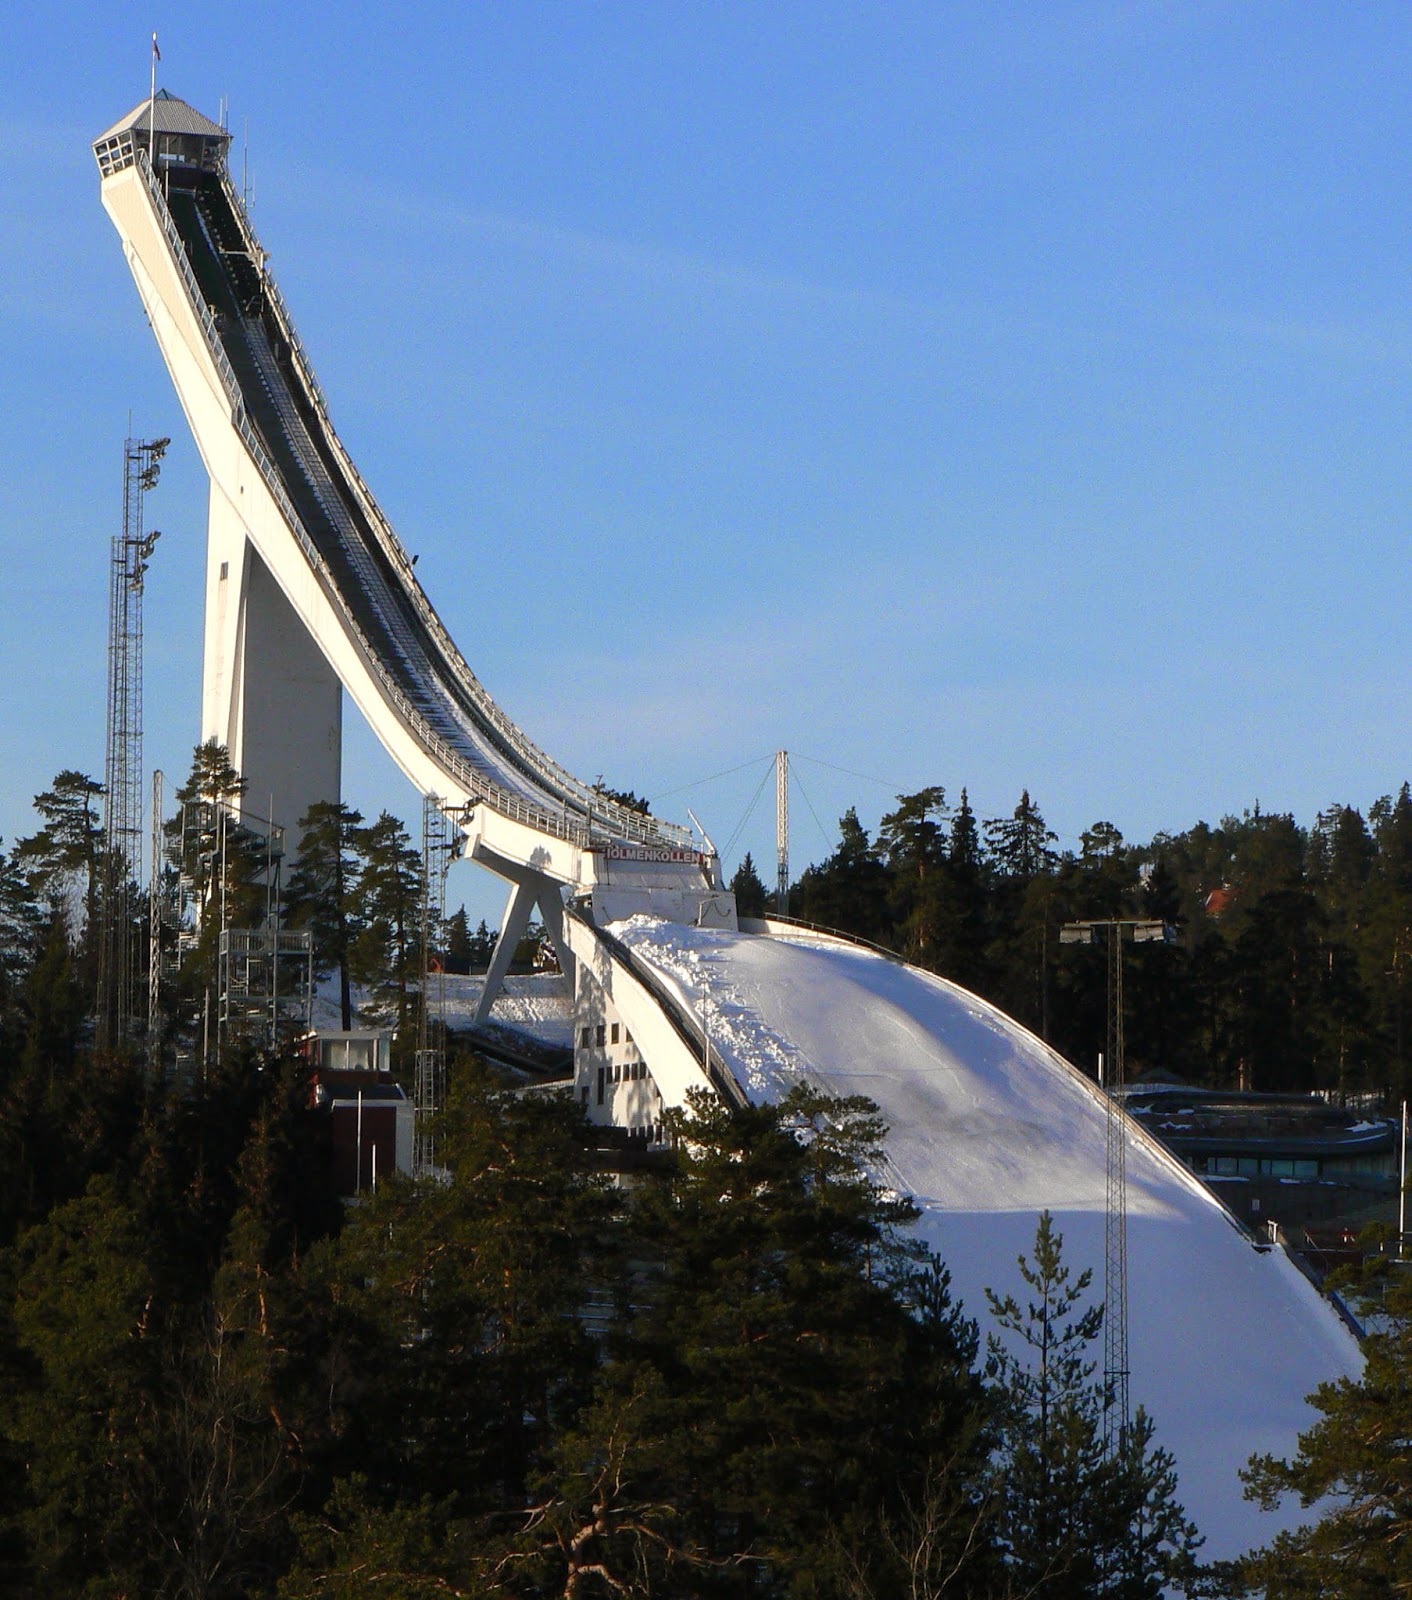 Physics Buzz Olympic Women Ski Jump Equally Far On The Moon intended for Ski Jumping Ramp